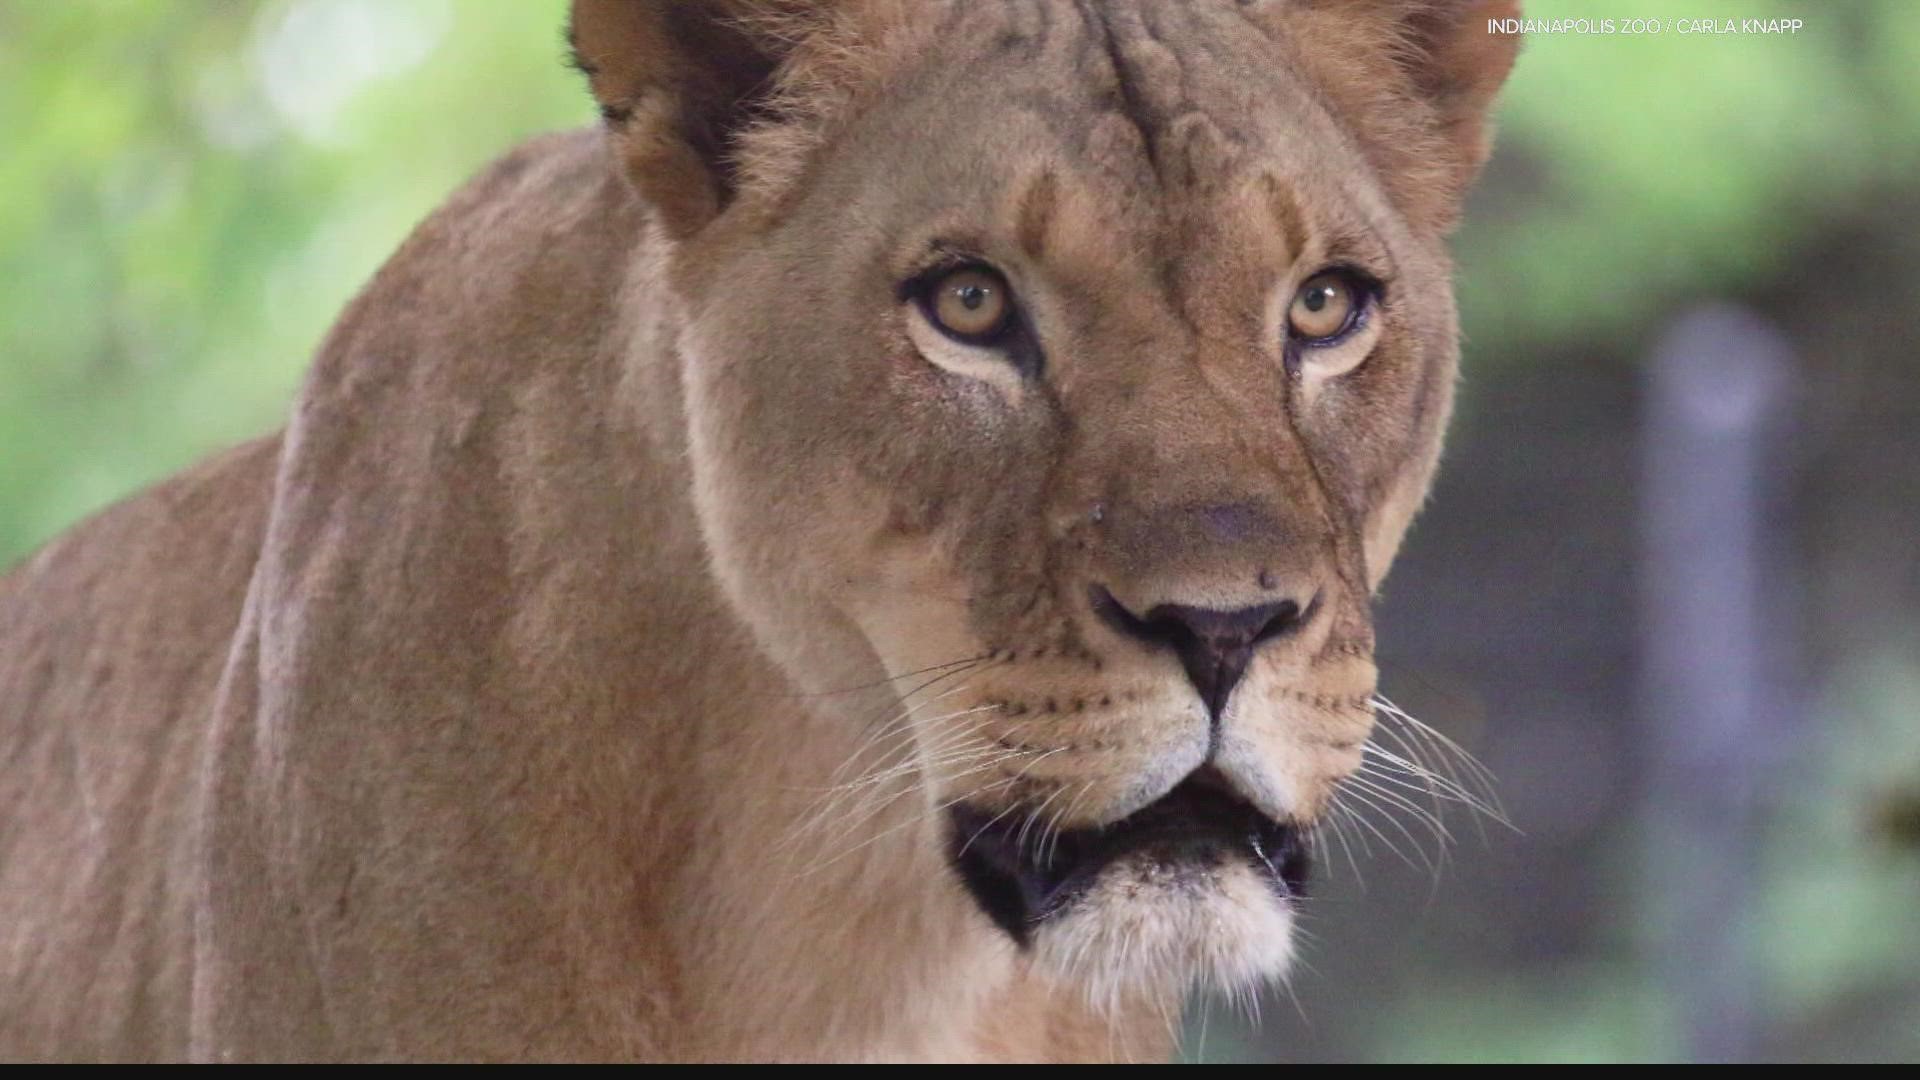 Two lions at the Indianapolis Zoo are recovering after testing positive for COVID.